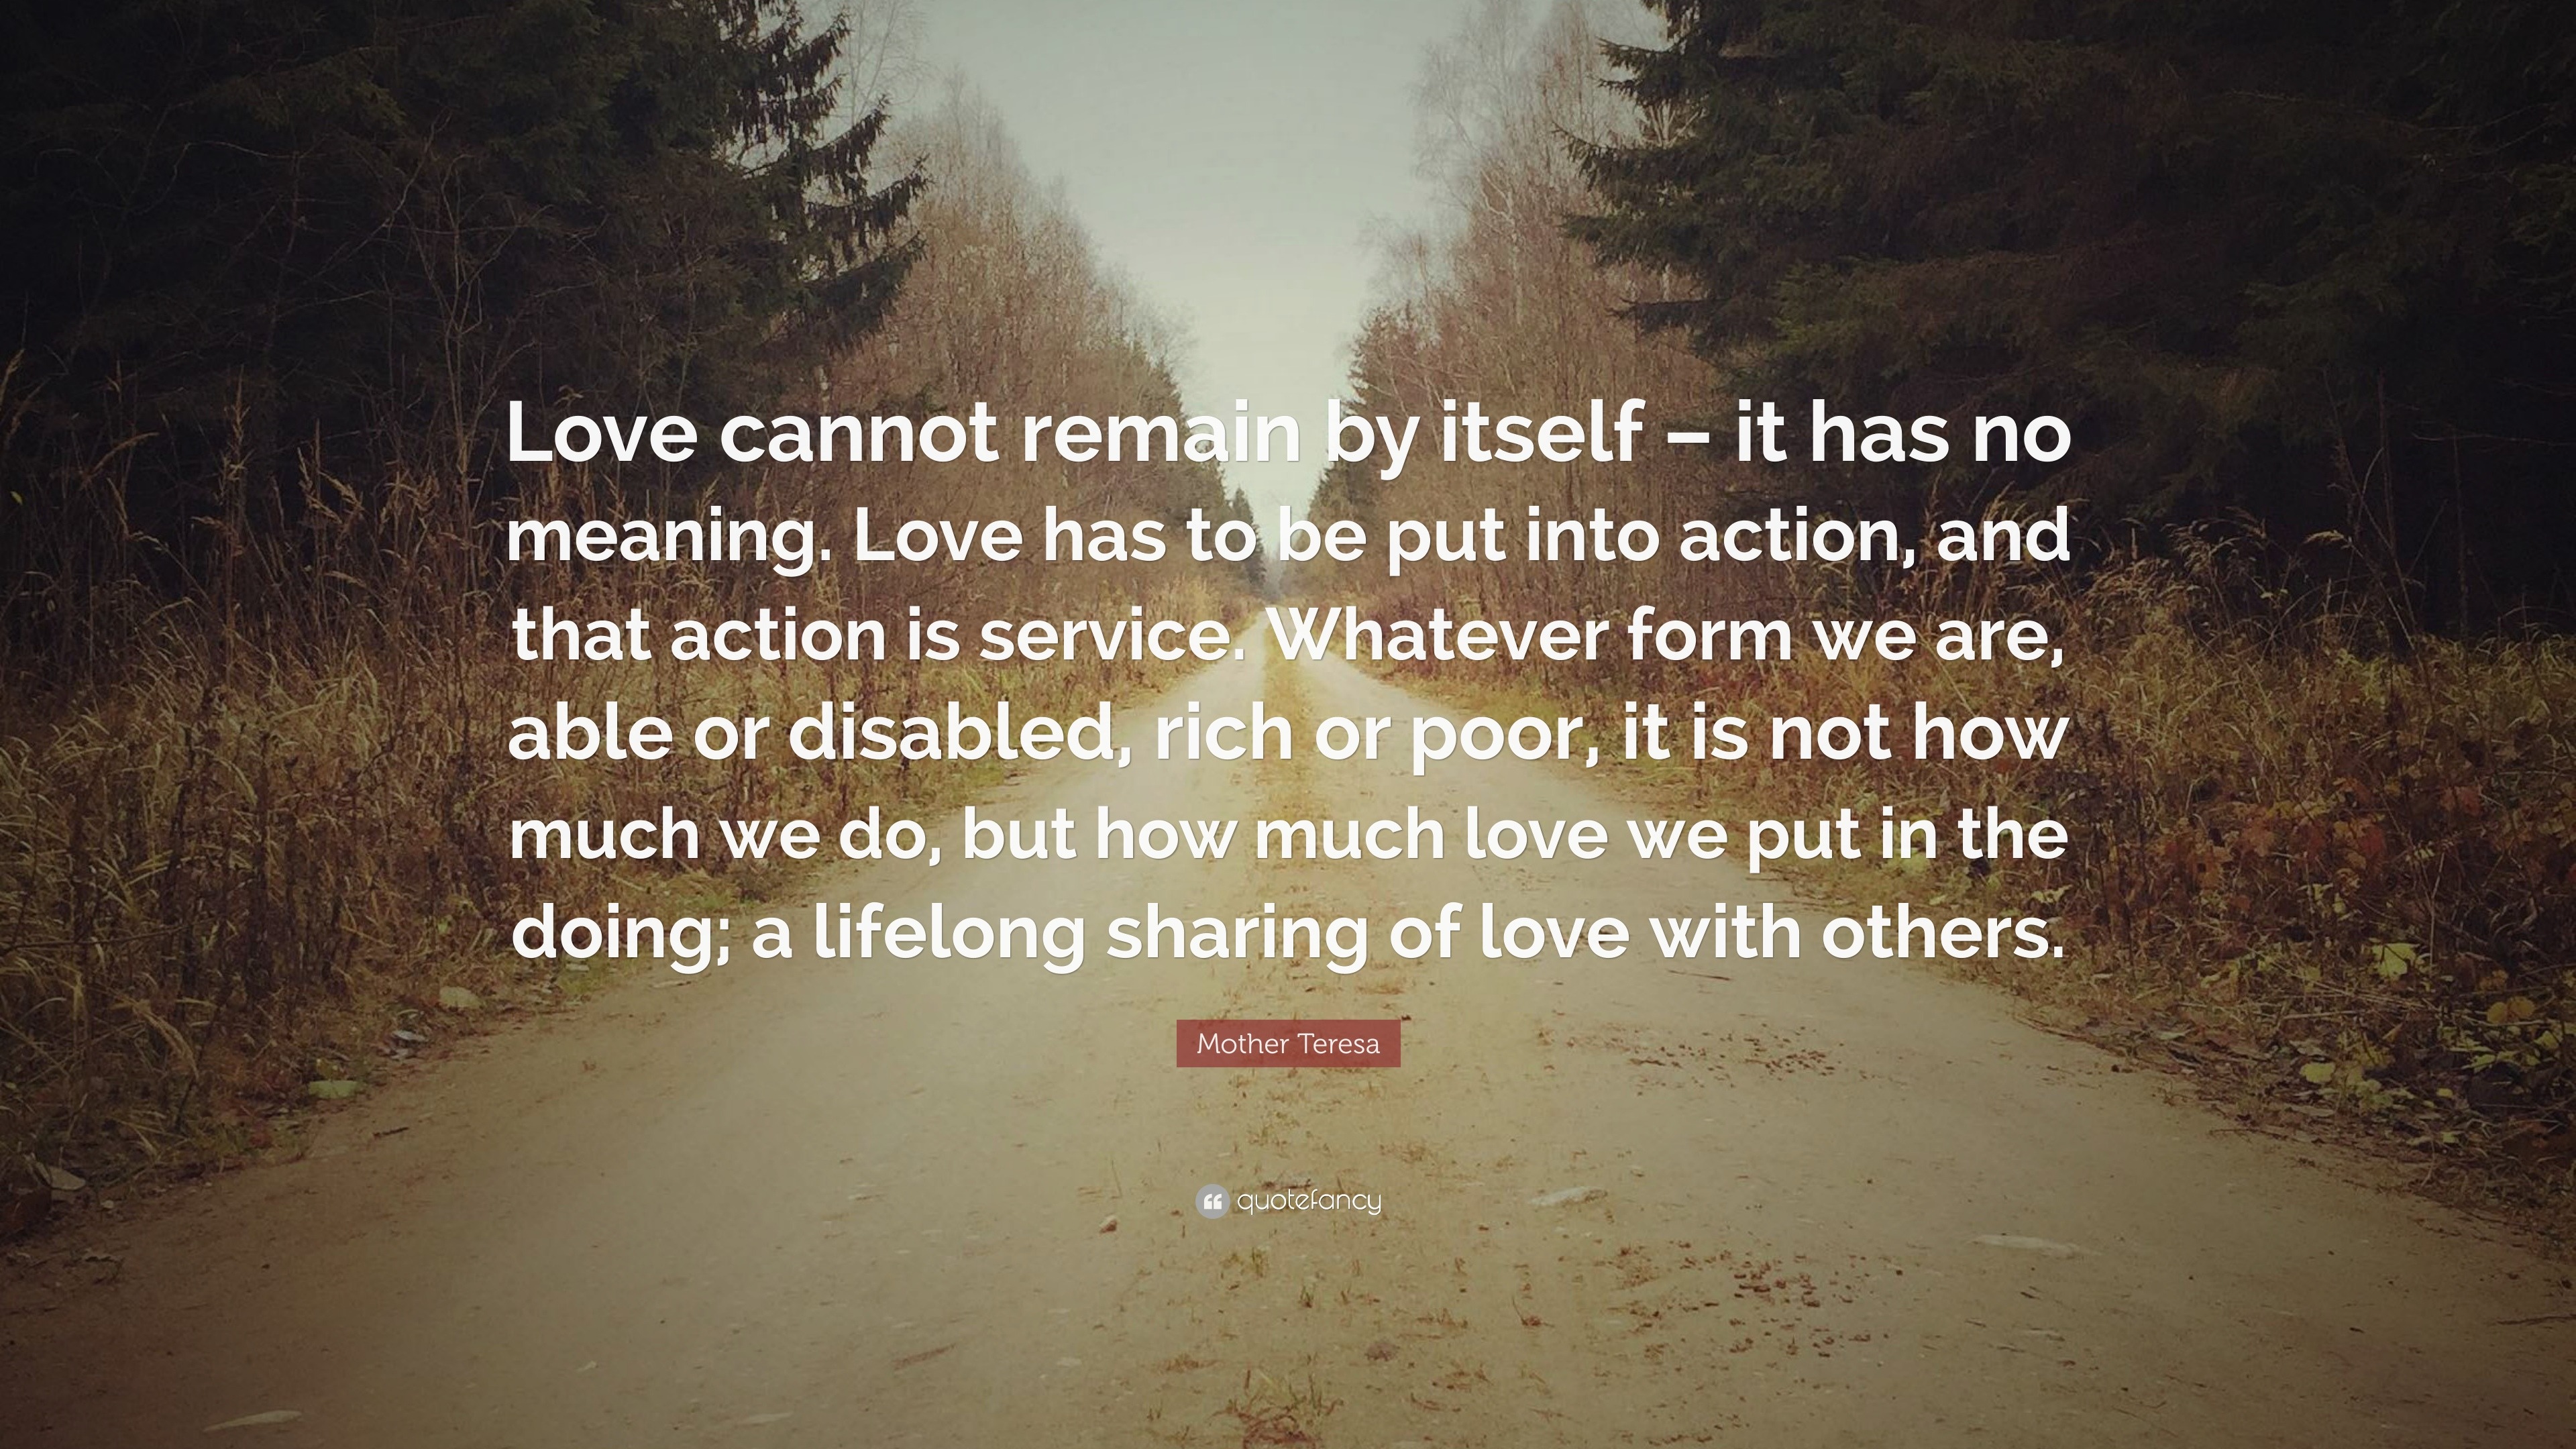 Mother Teresa Quote “Love cannot remain by itself – it has no meaning